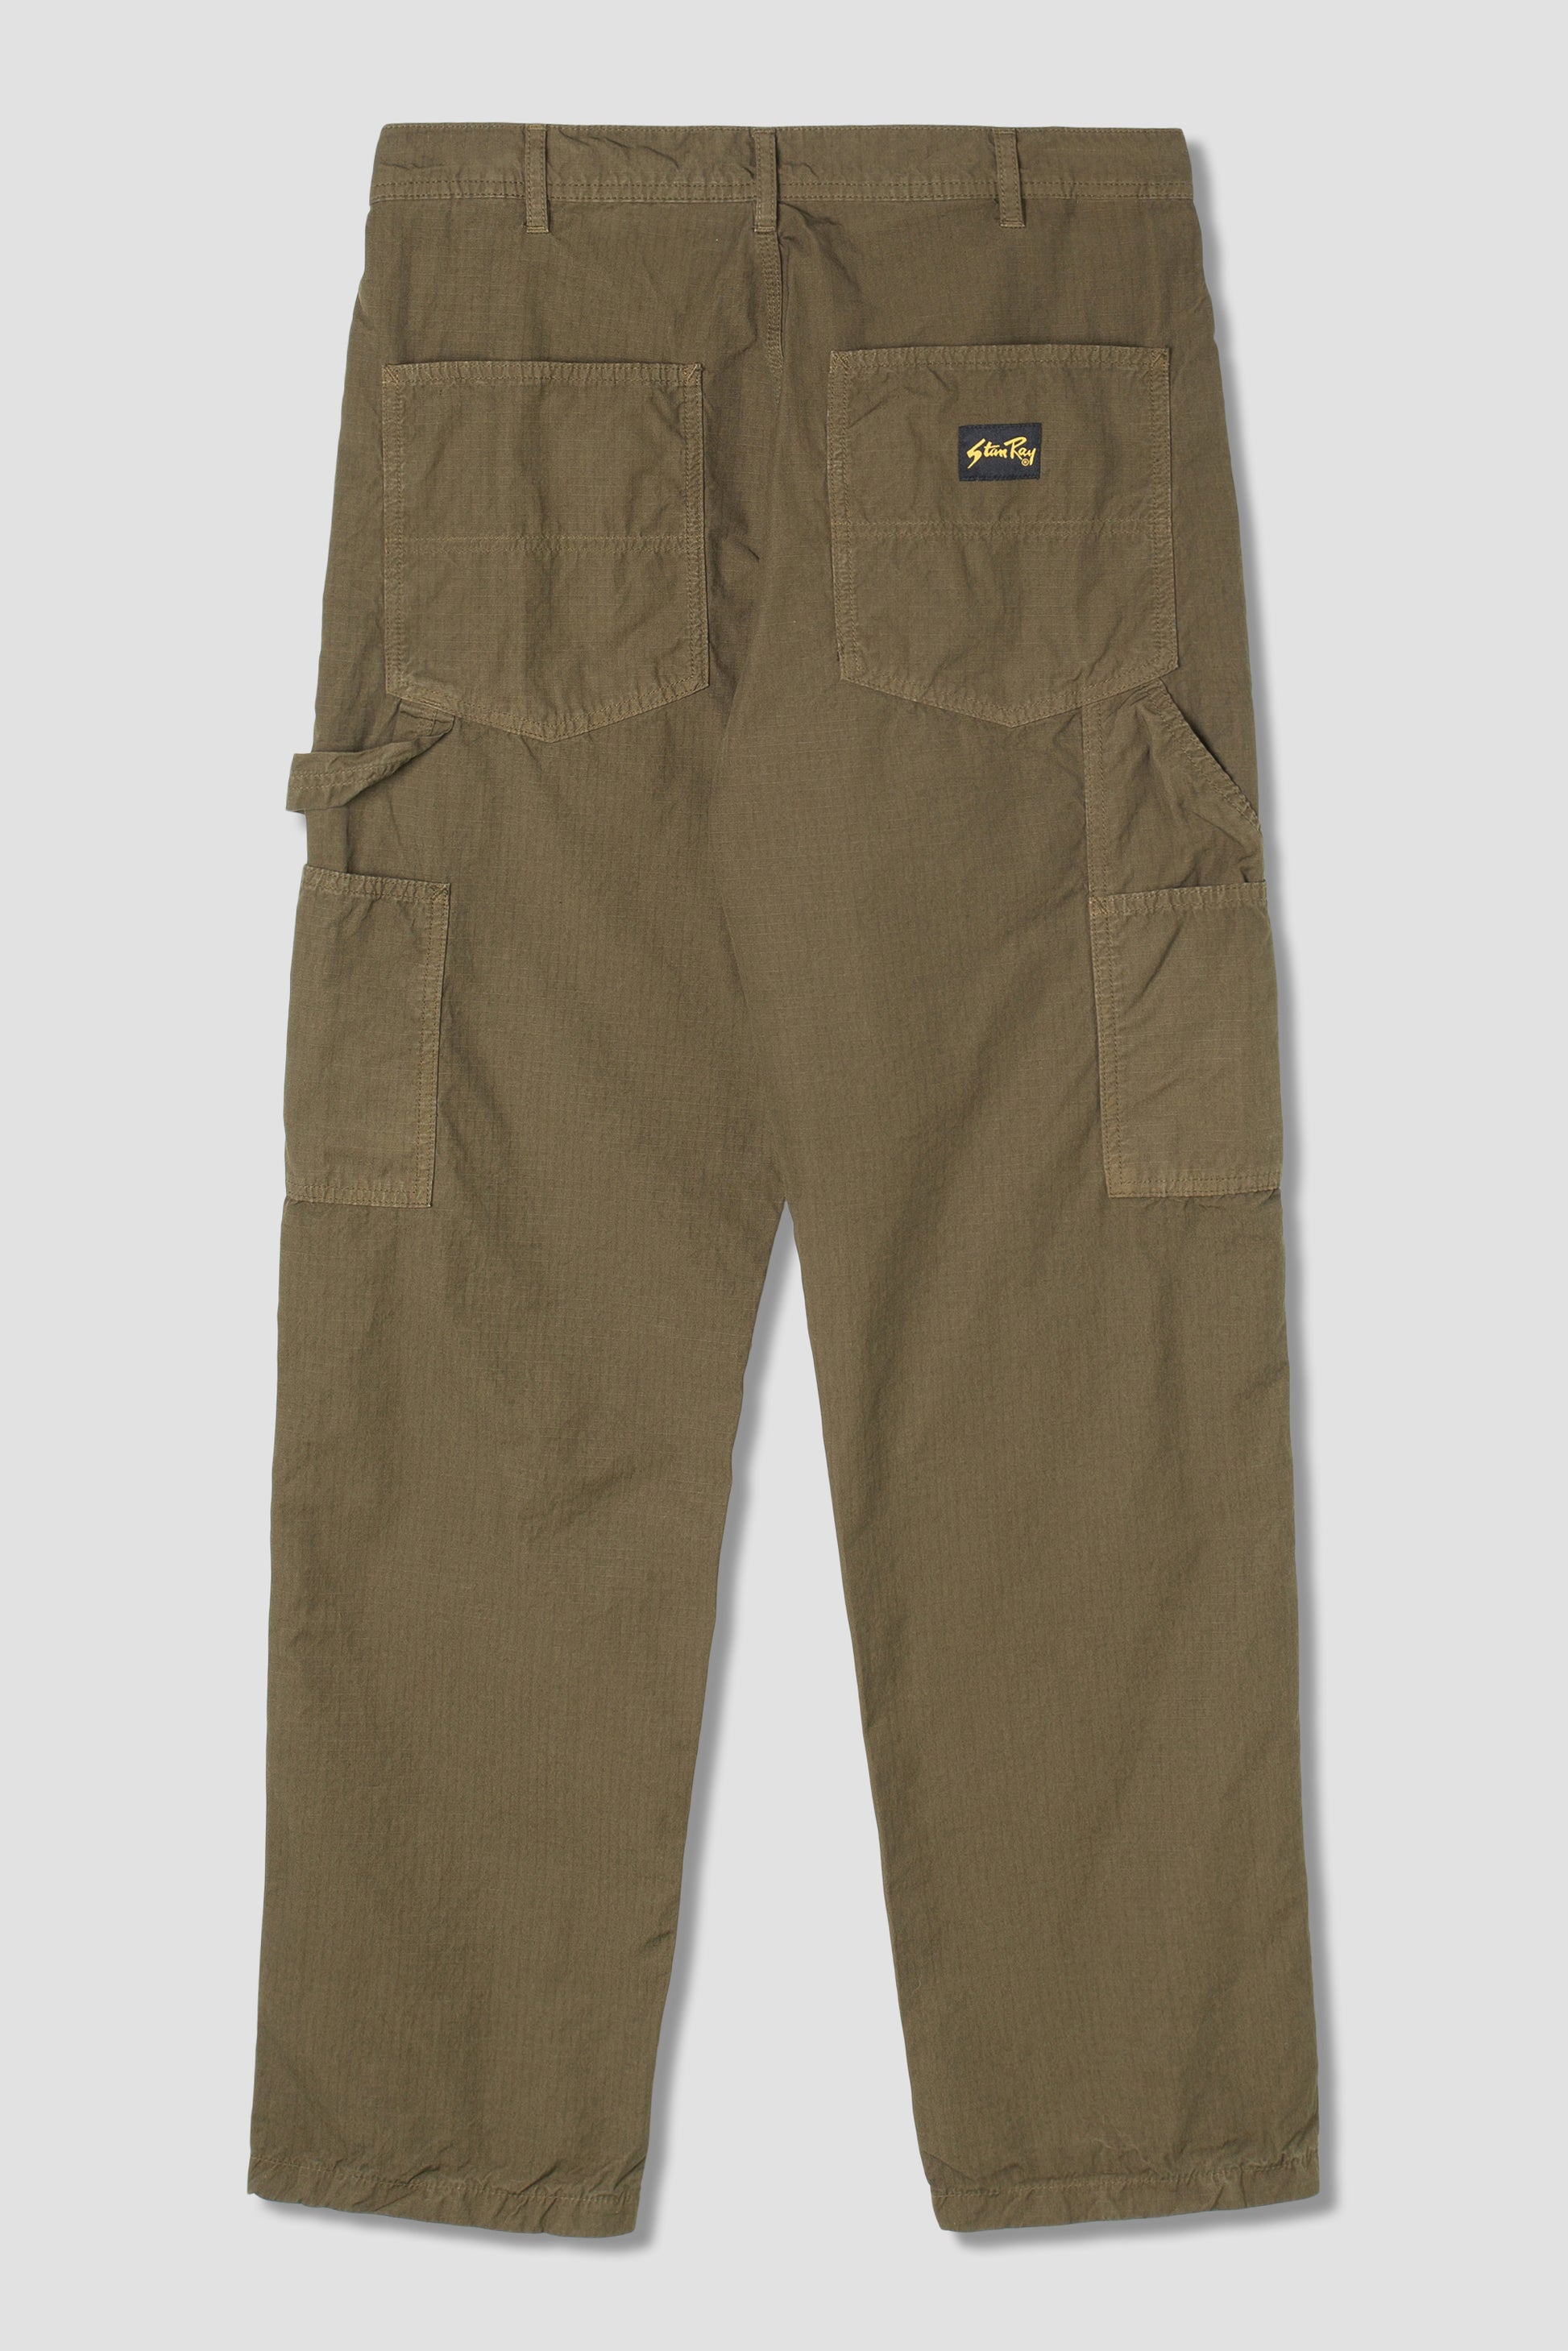 OG Painter Pant (Olive Ripstop) – Stan Ray